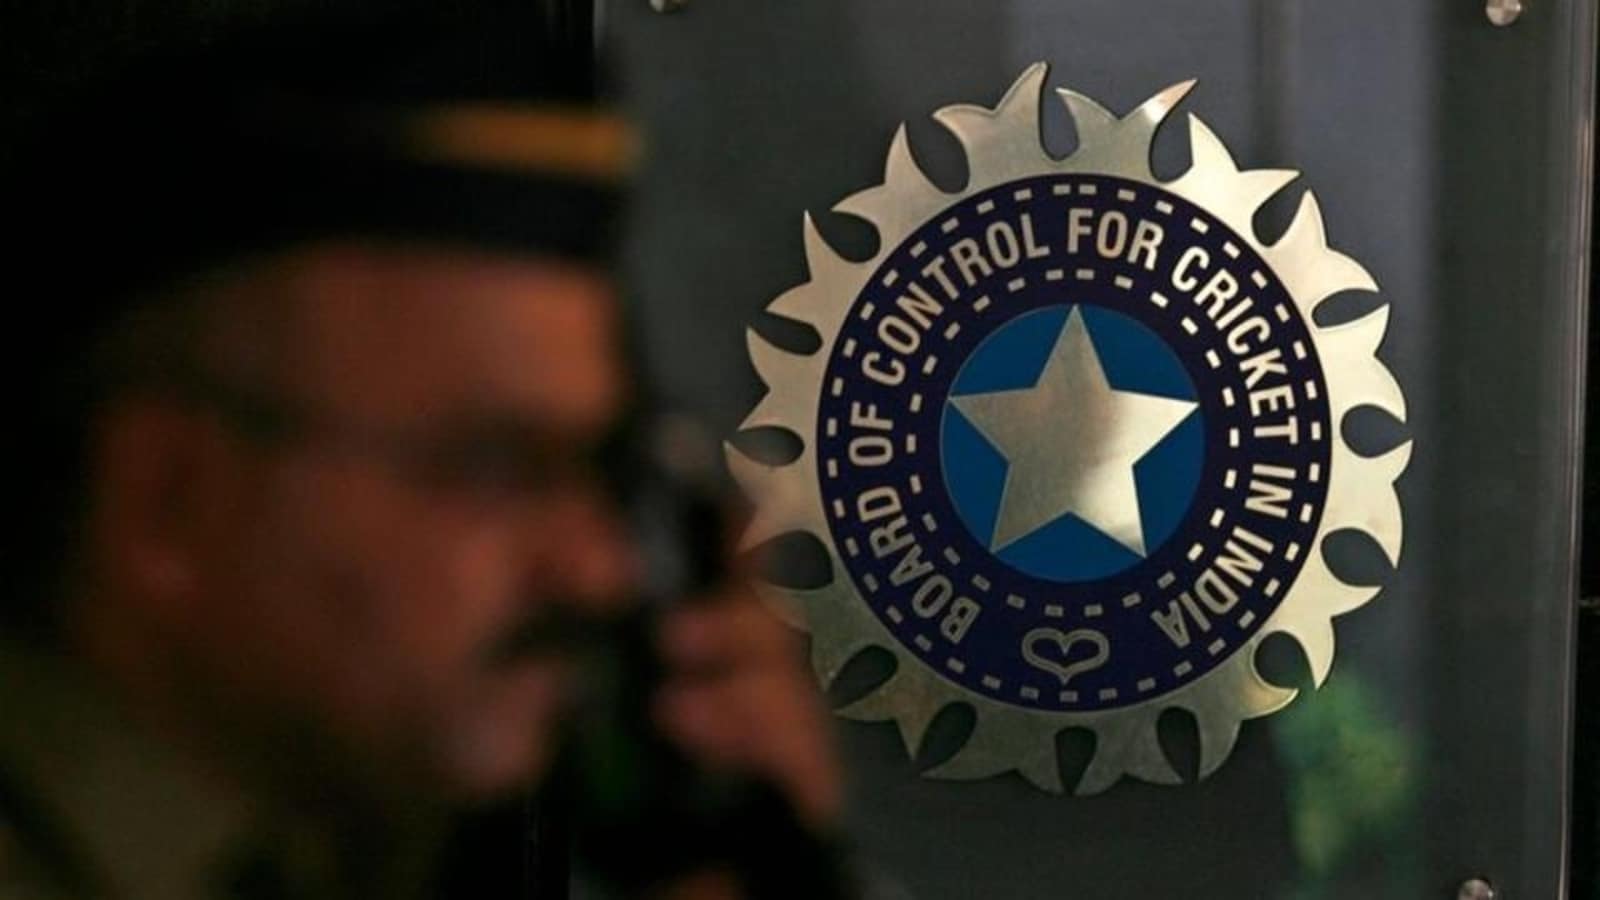 BCCI SGM: Board to officially lock in IPL 2021 window, Ranji compensation could be discussed